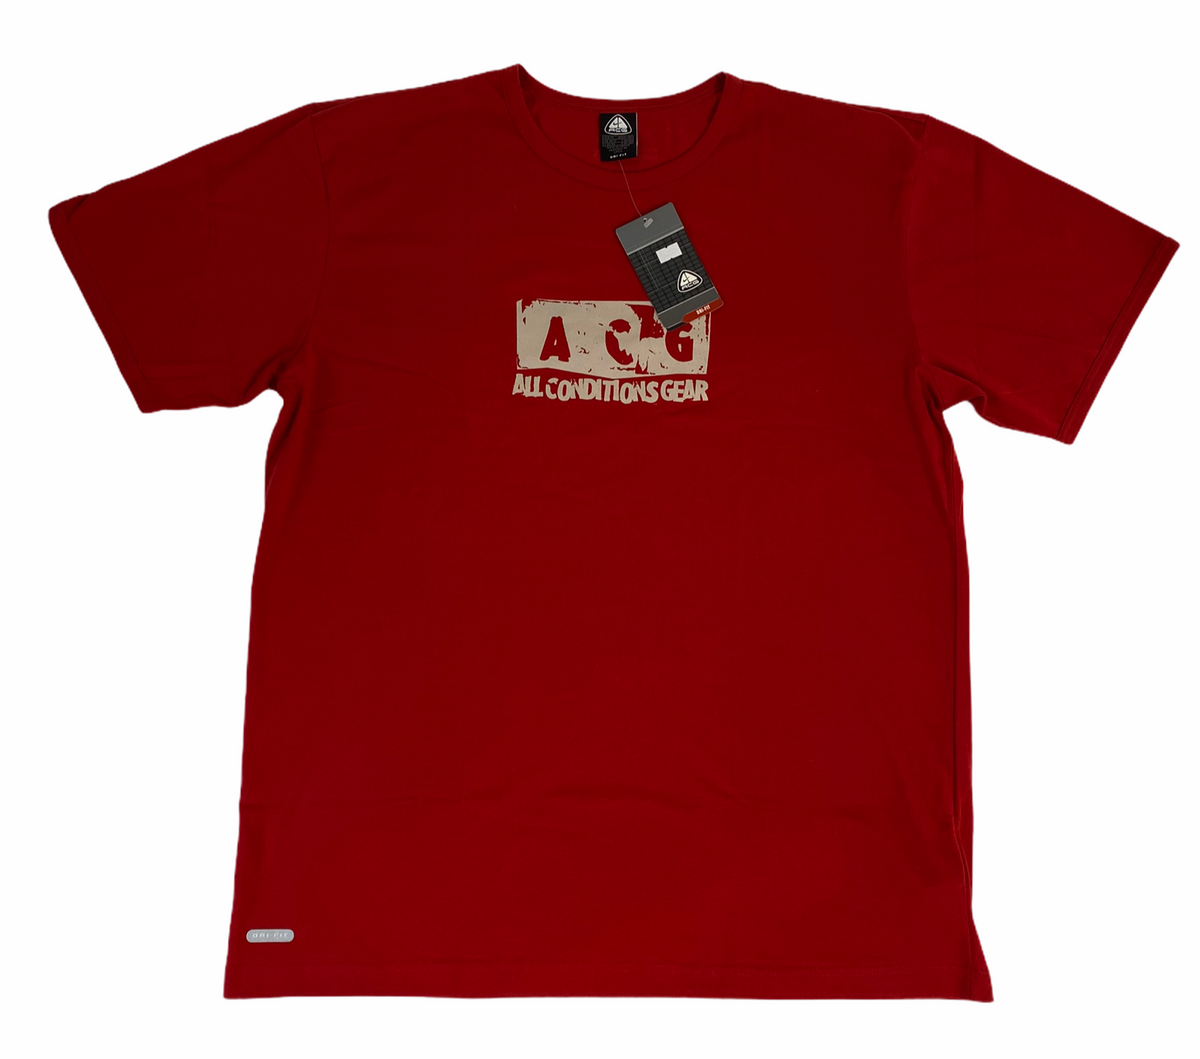 VINTAGE 2002 NIKE ACG ALL CONDITIONS GEAR T-SHIRT - Not In Your Wardrobe™ - [Vendor]